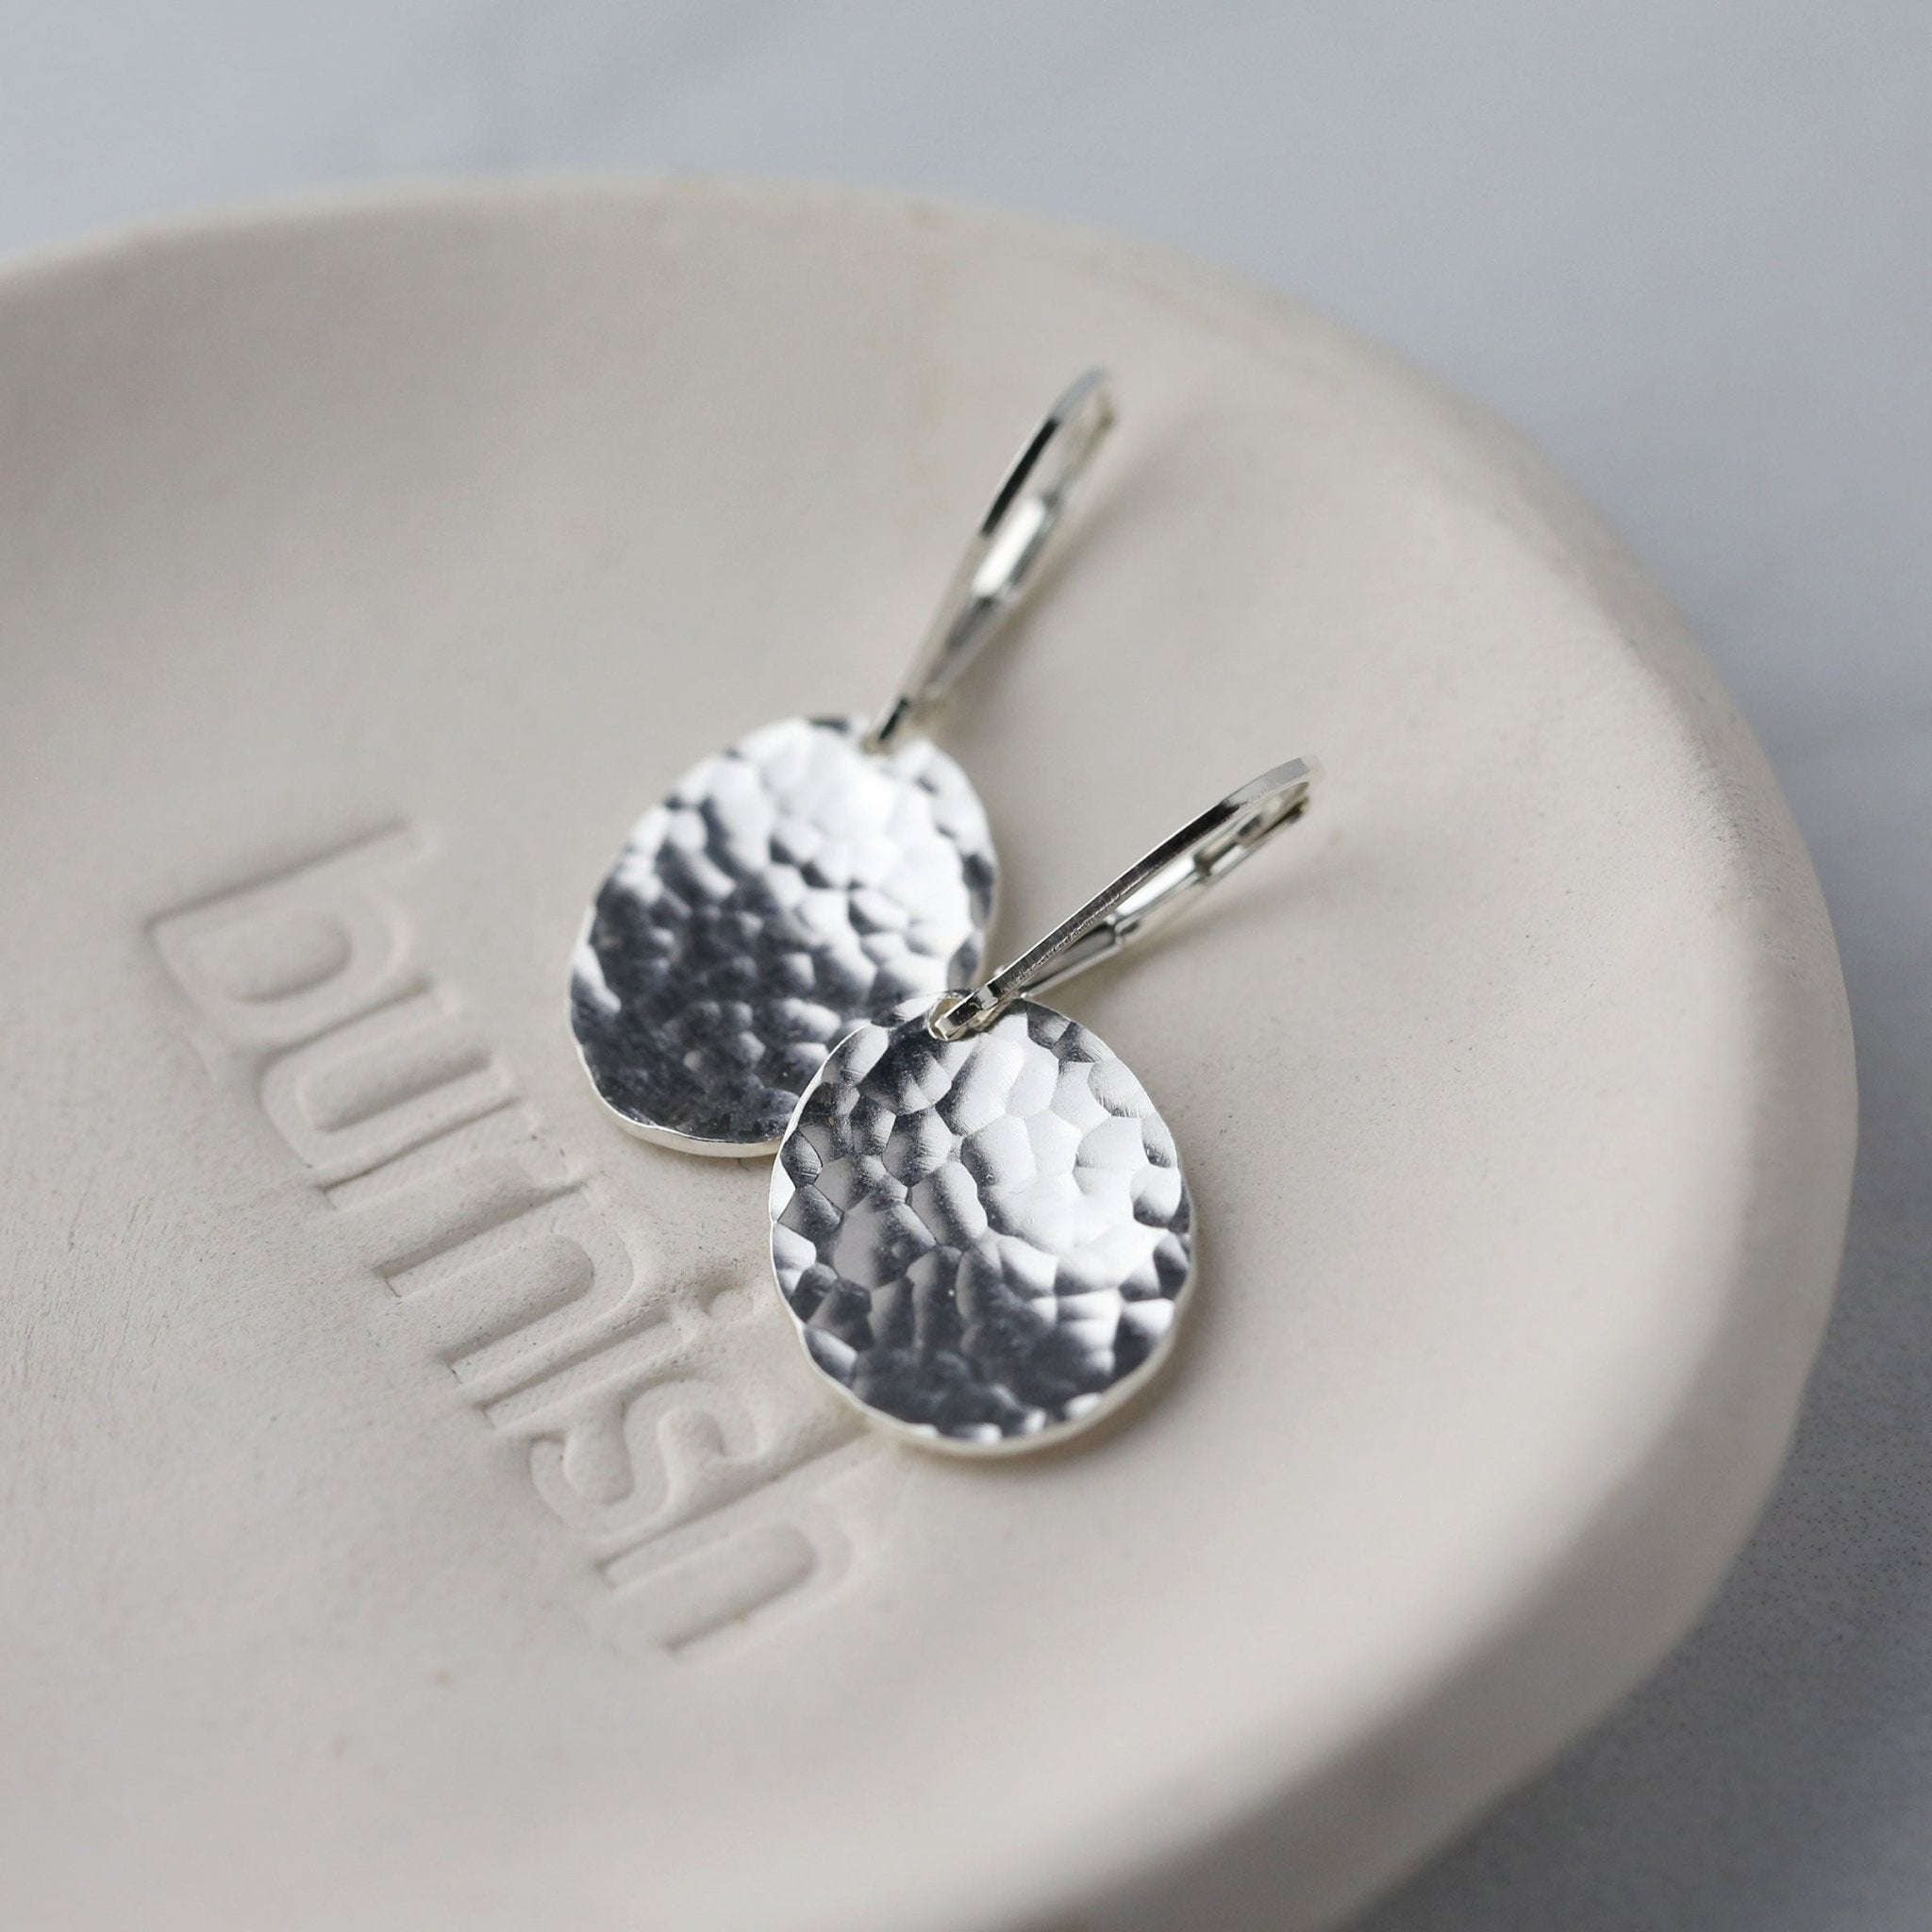 Oval Hammered Silver Disc Lever-back Earrings